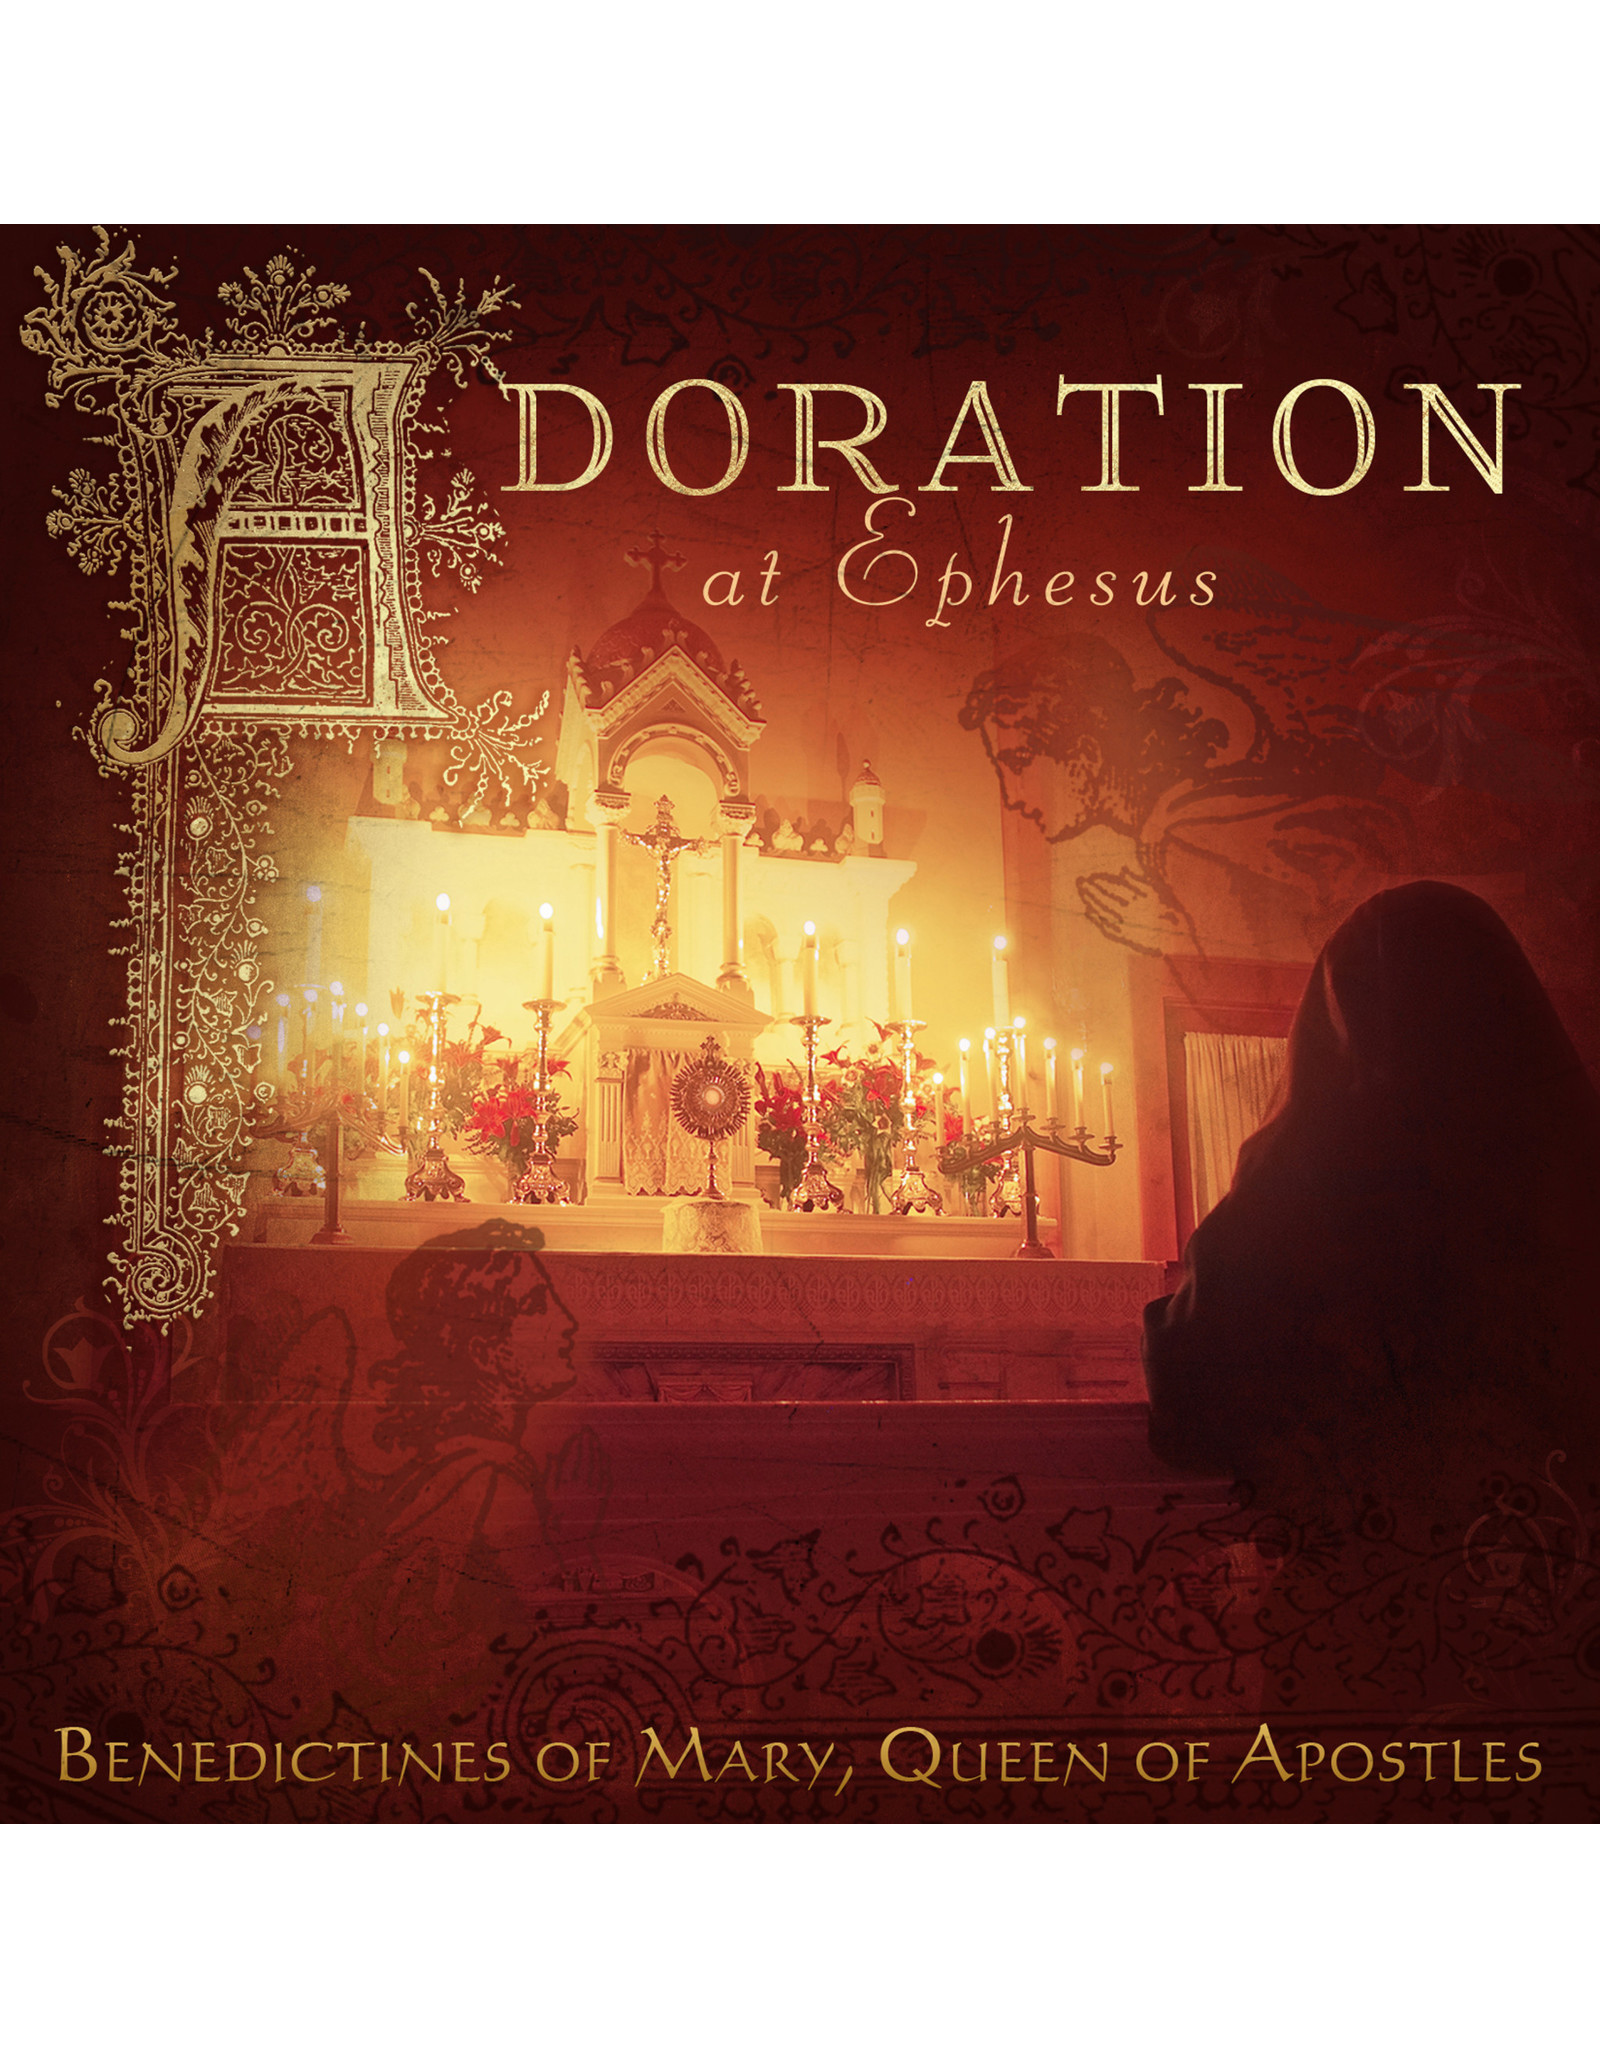 Heartbeat Adoration At Ephesus - Benedictines of Mary Queen of Apostles CD